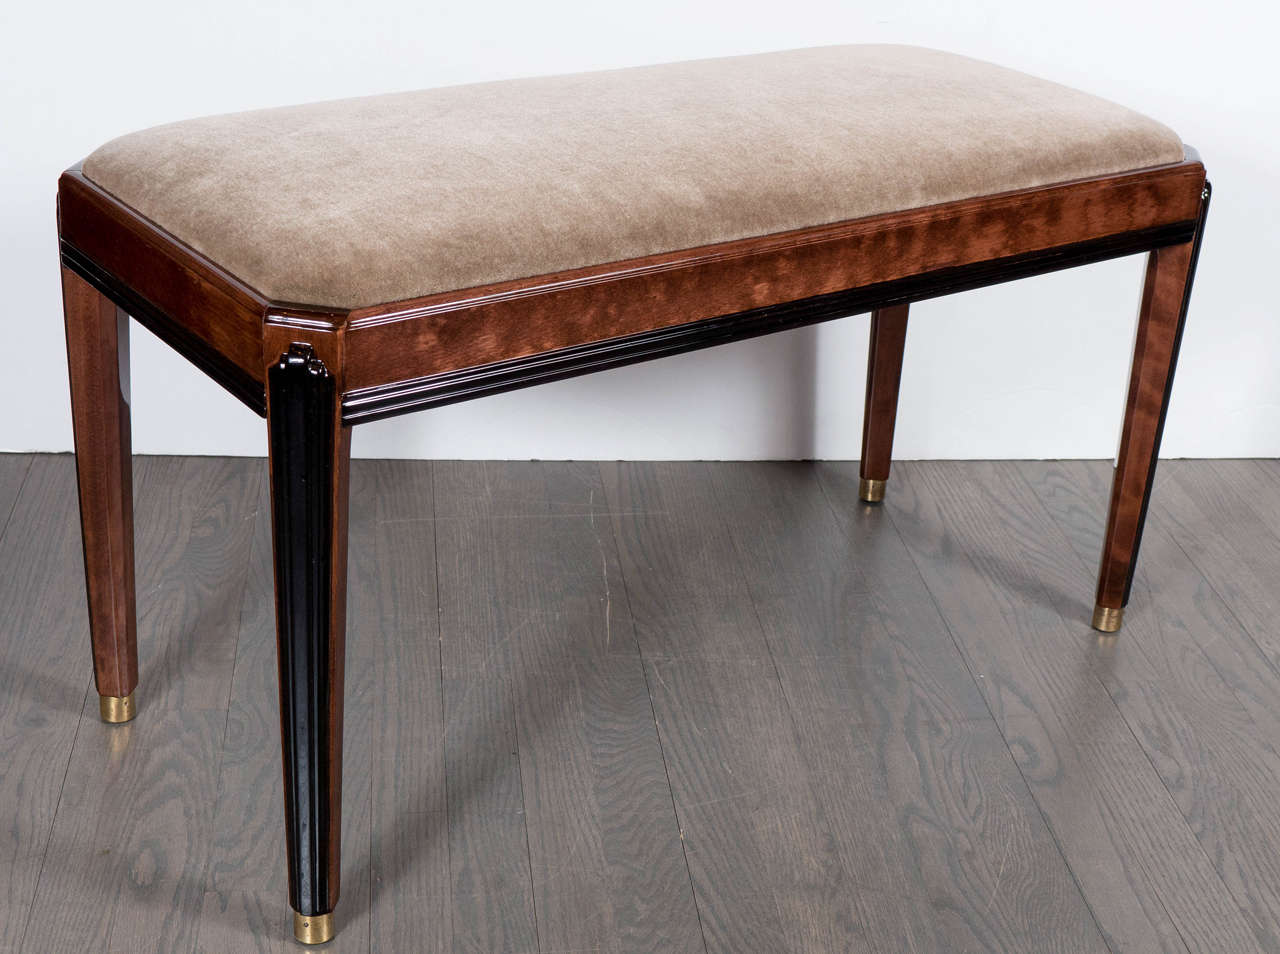 This impressive bench features a stepped skyscraper design in black lacquer on the walnut legs, the legs are also fitted with brass sabots. The frame of the bench is brown walnut and it has also been newly upholstered in a rich tobacco mohair. This